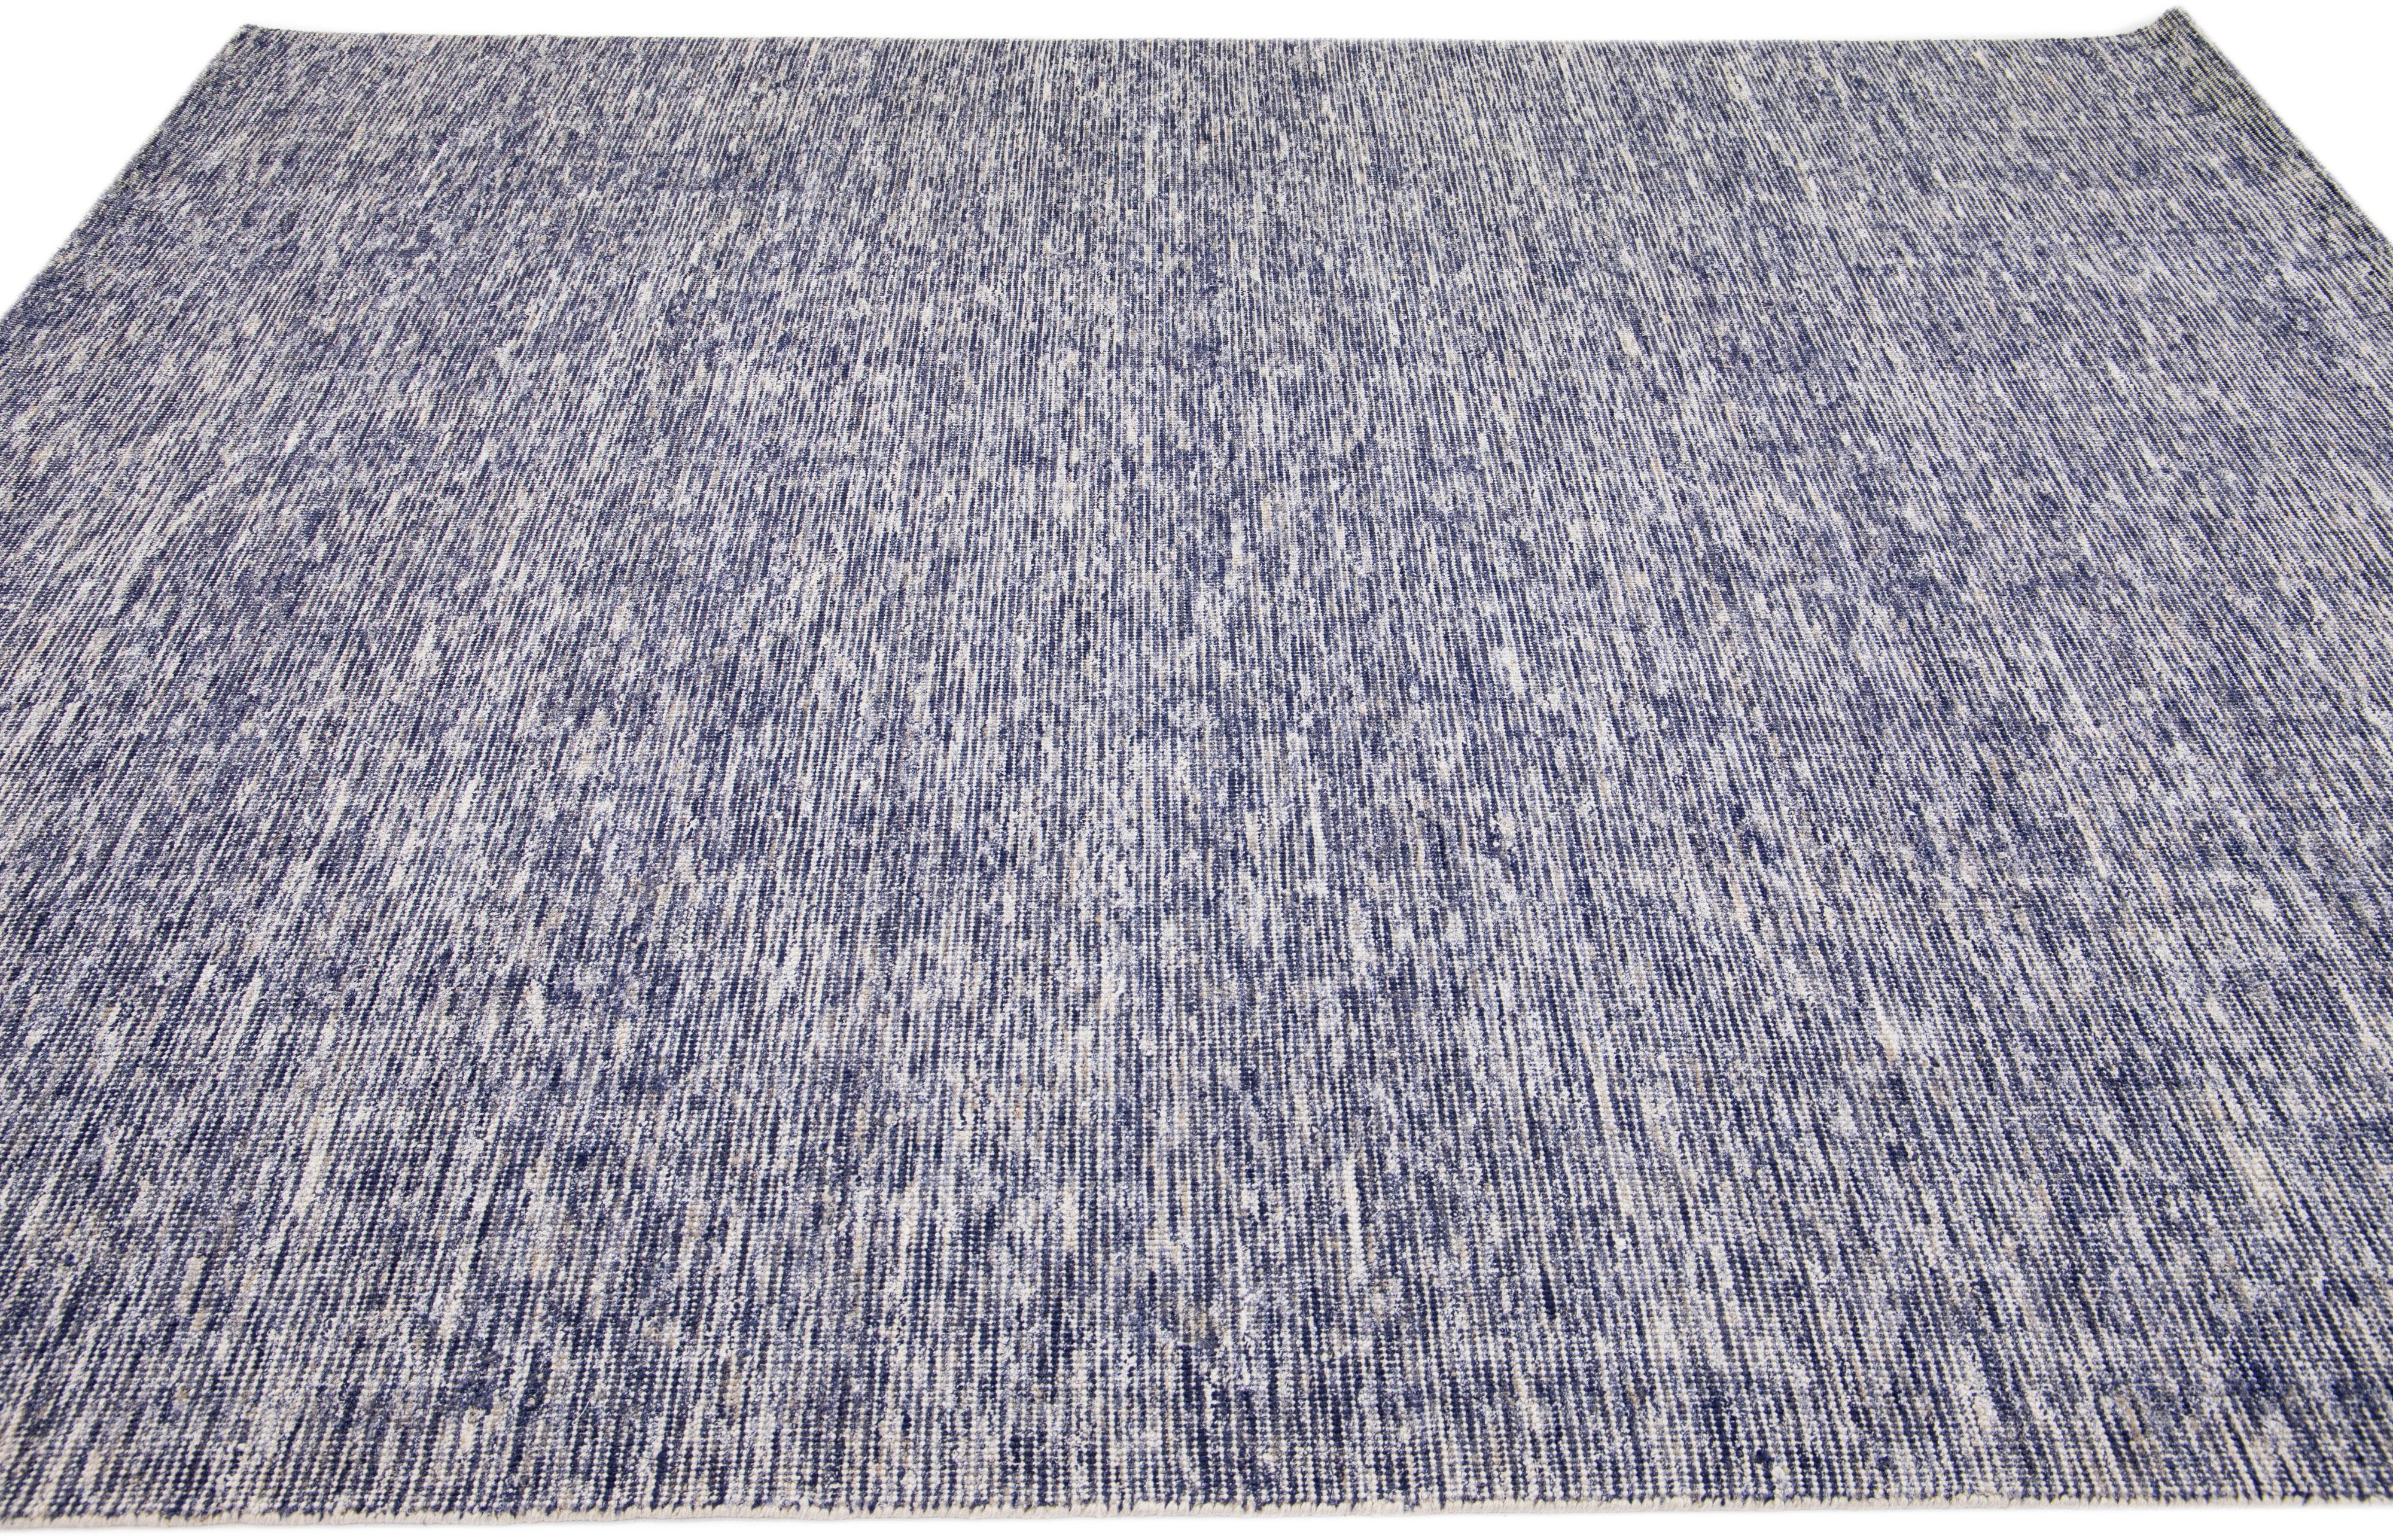 Beautiful Apadanas's handmade bamboo & silk Indian groove rug with a navy blue field. This groove collection rug has an all-over solid design.

This rug measures 8' x 10'.

Custom colors and sizes are available upon request.

